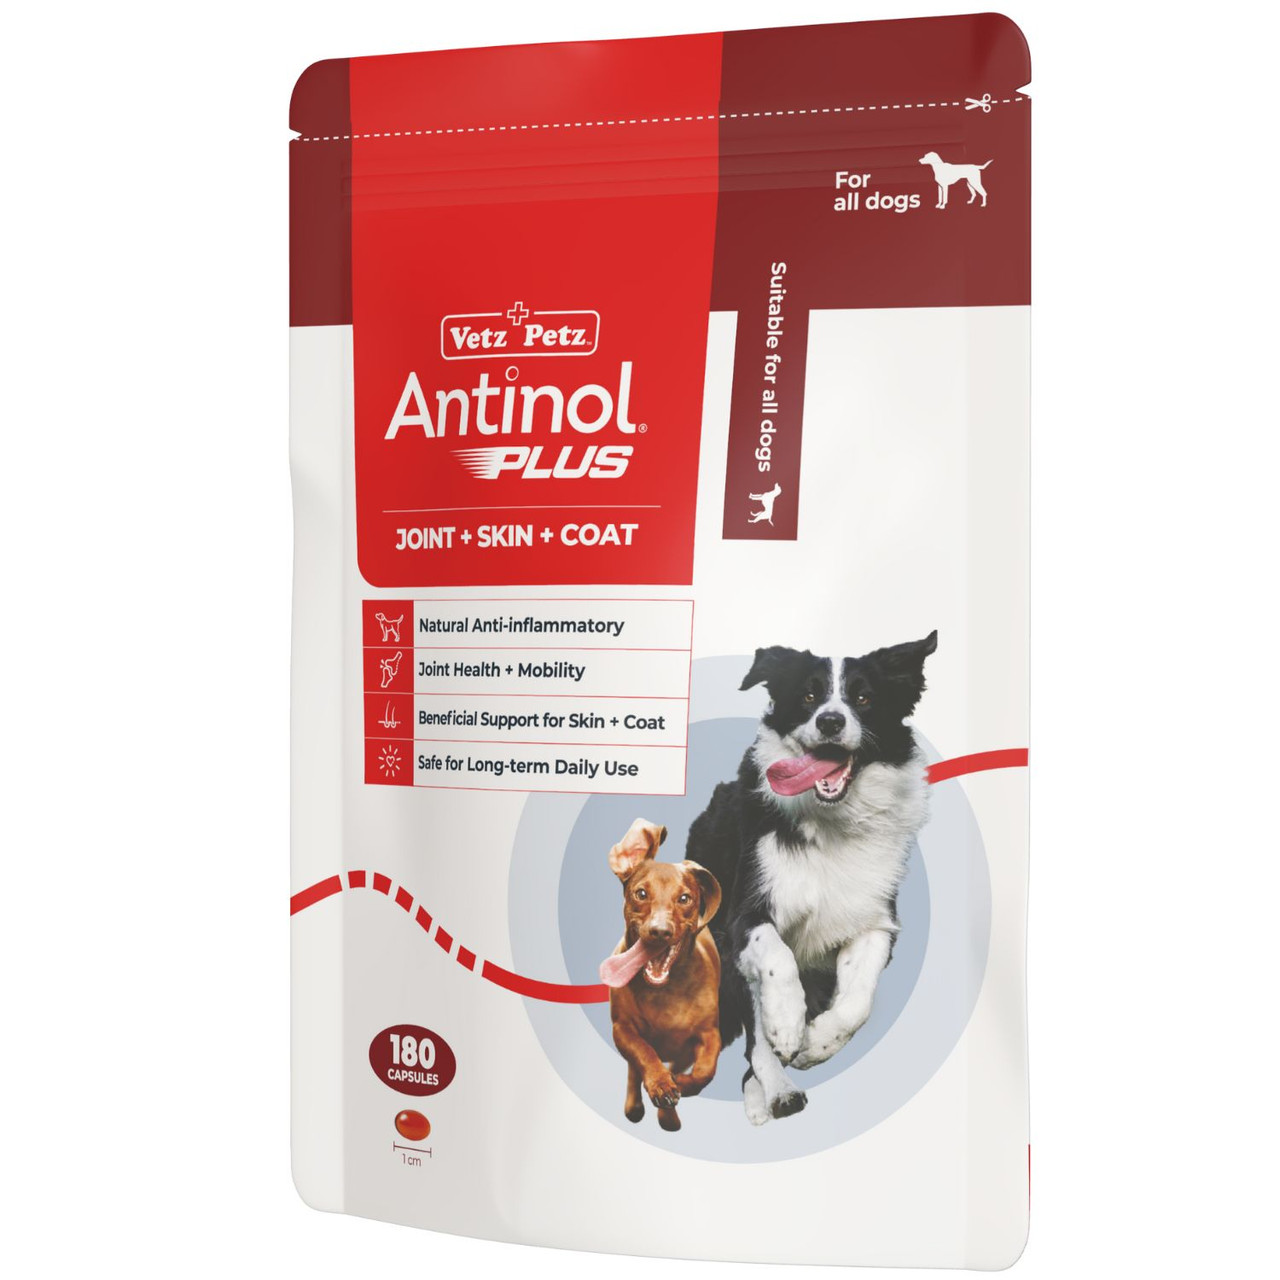 Antinol Plus EAB-277 For Dogs 180s - new packaging